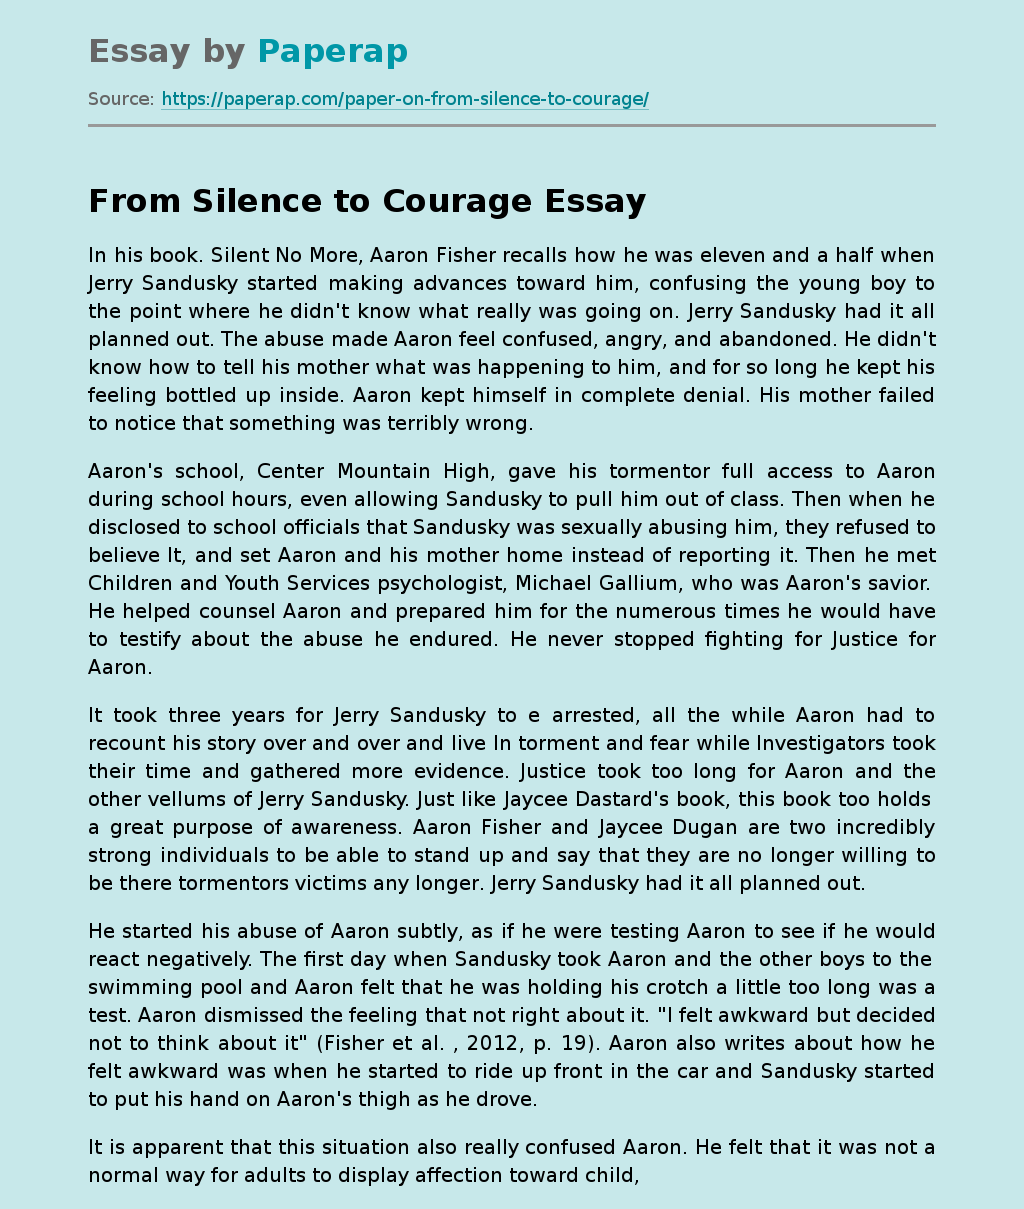 From Silence to Courage